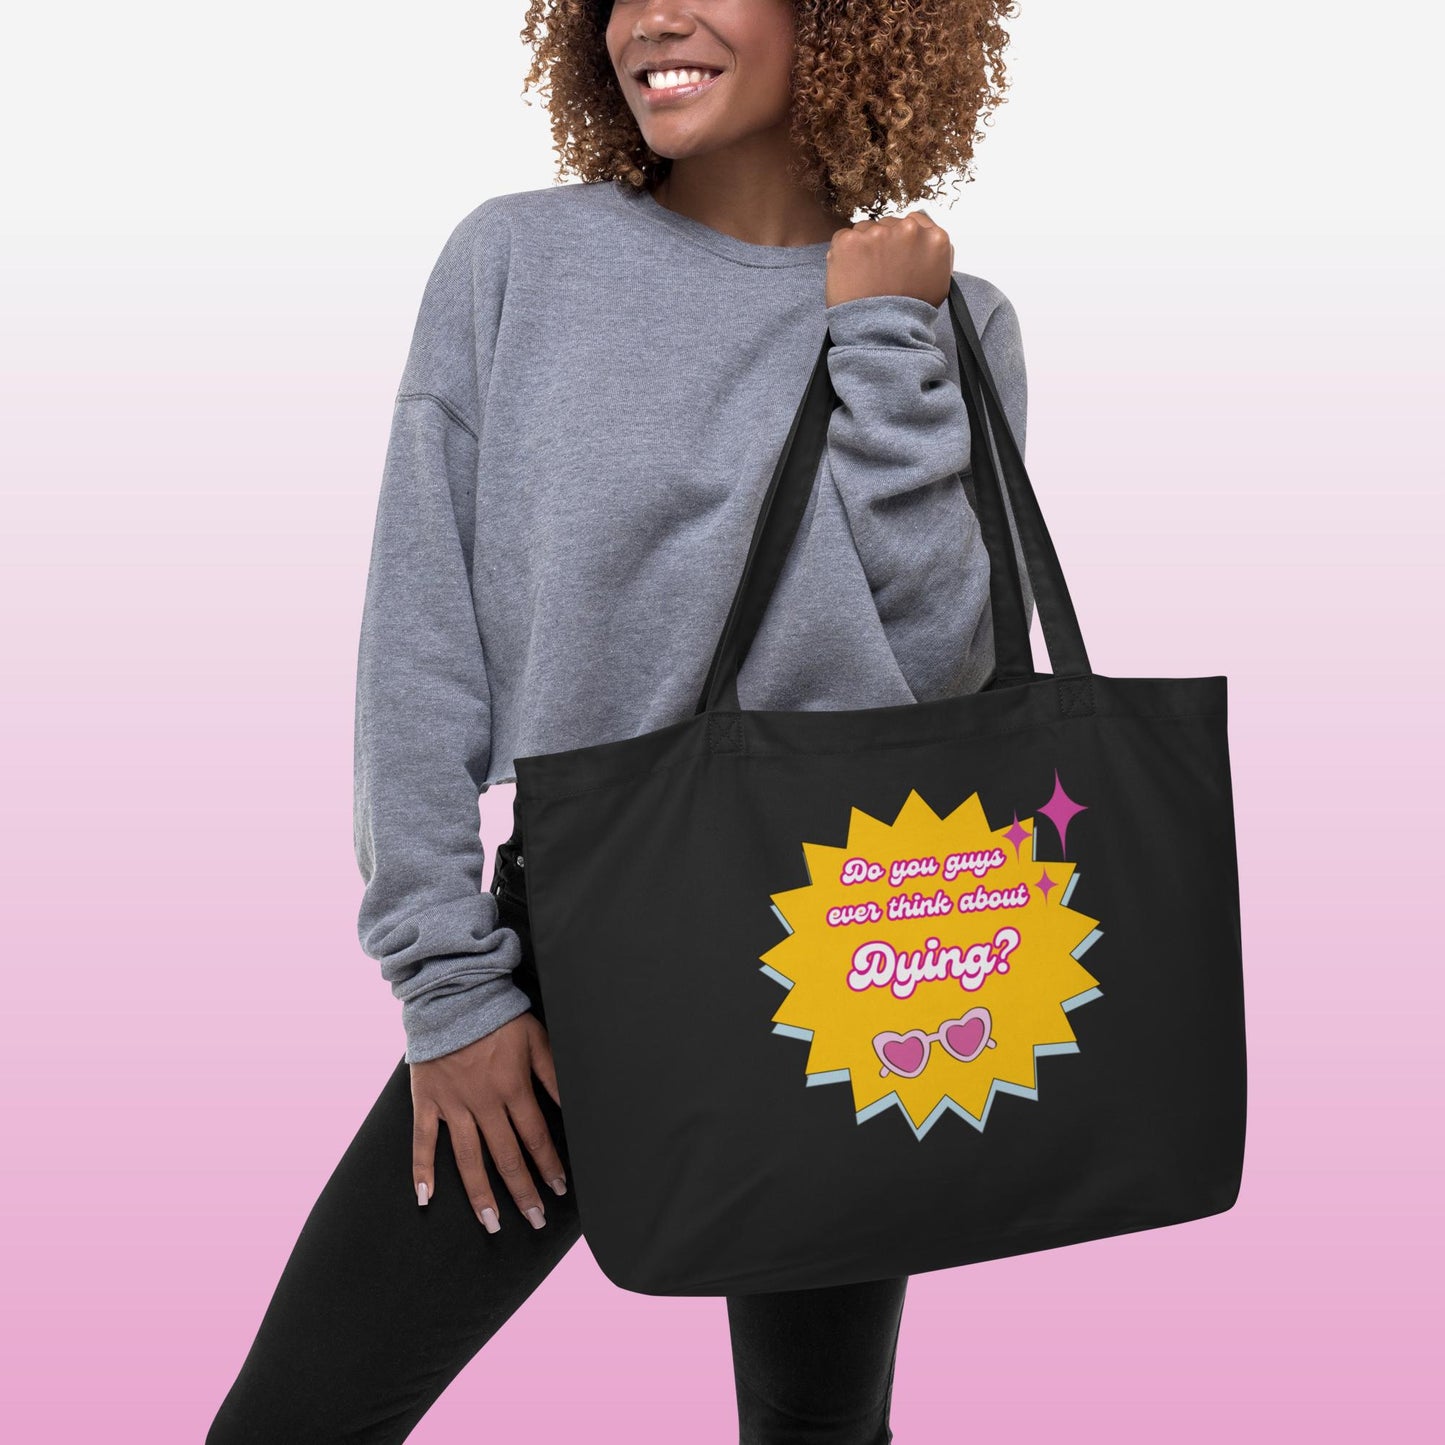 Do you guys ever think about dying? - Large organic tote bag